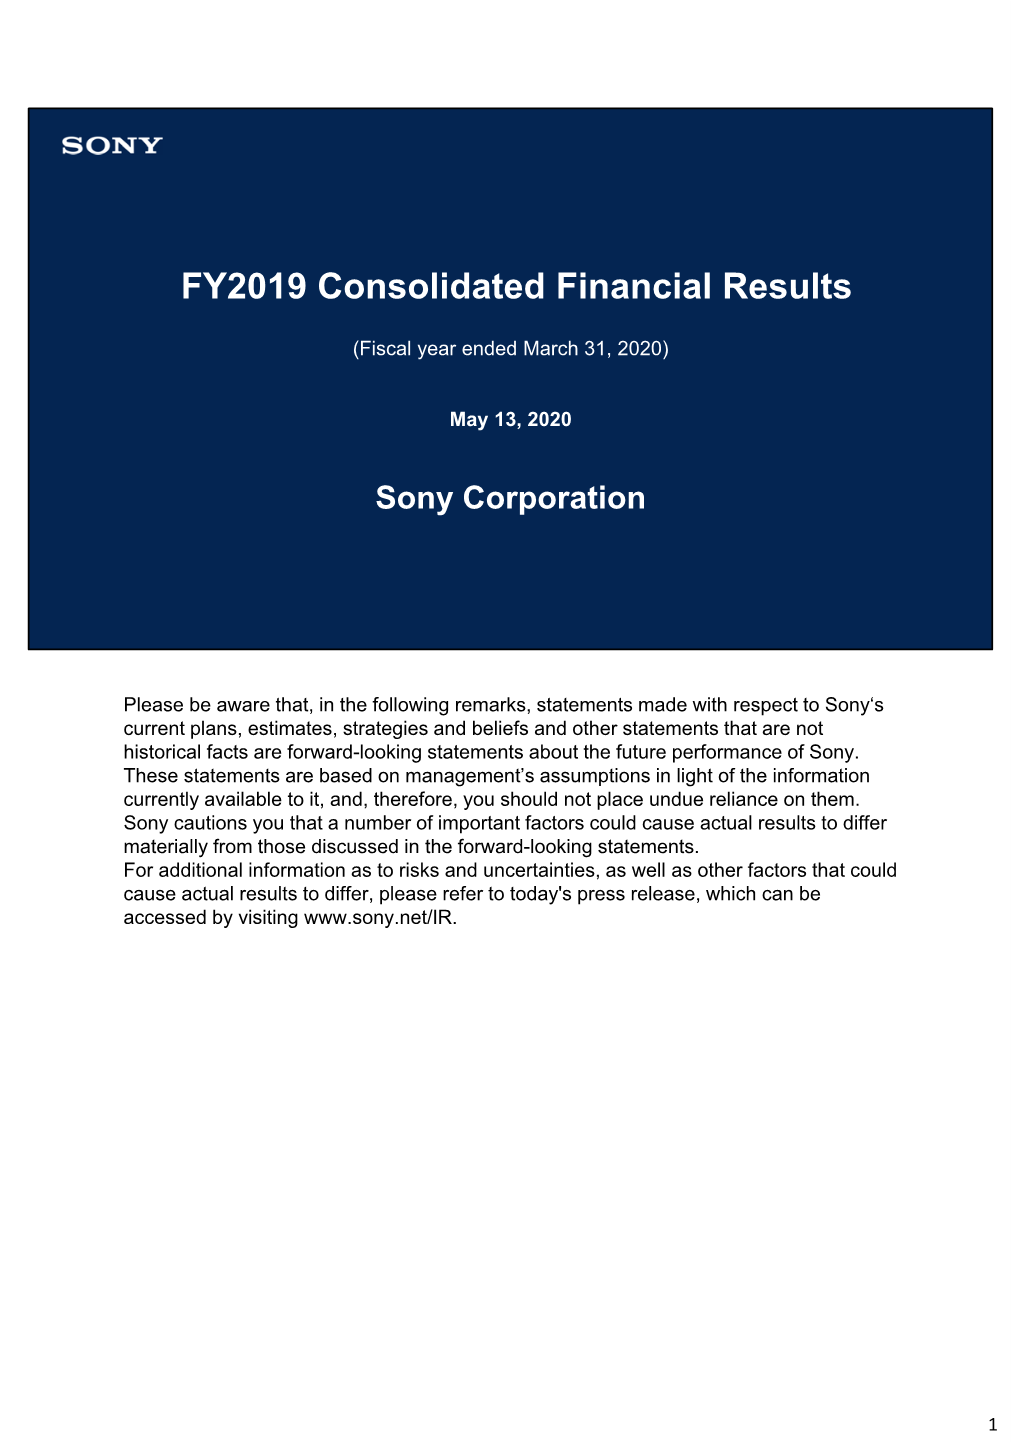 FY2019 Consolidated Financial Results